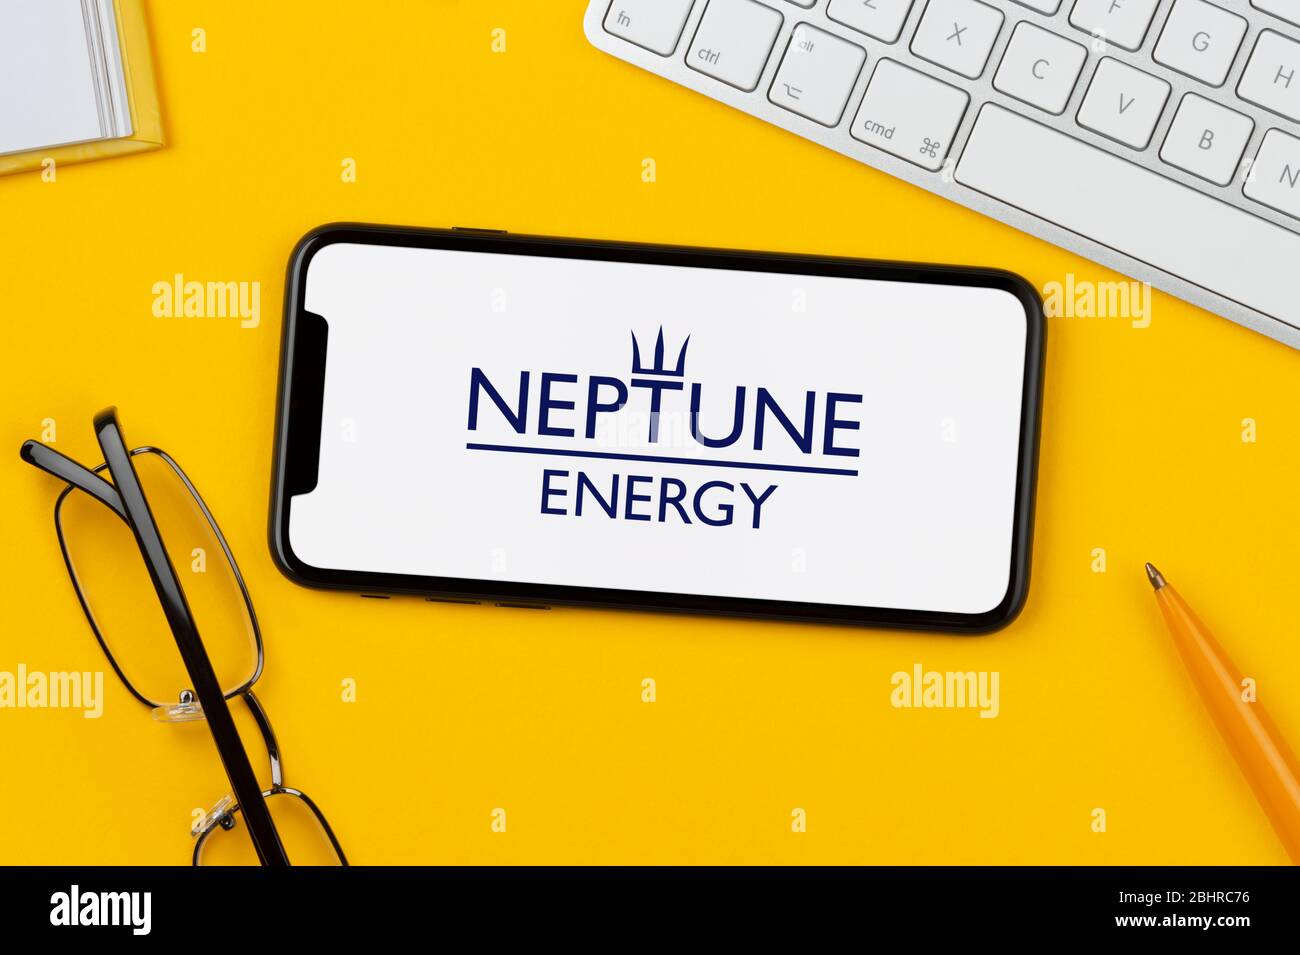 A smartphone showing the Neptune Energy logo rests on a yellow background along with a keyboard, glasses, pen and book (Editorial use only). Stock Photo